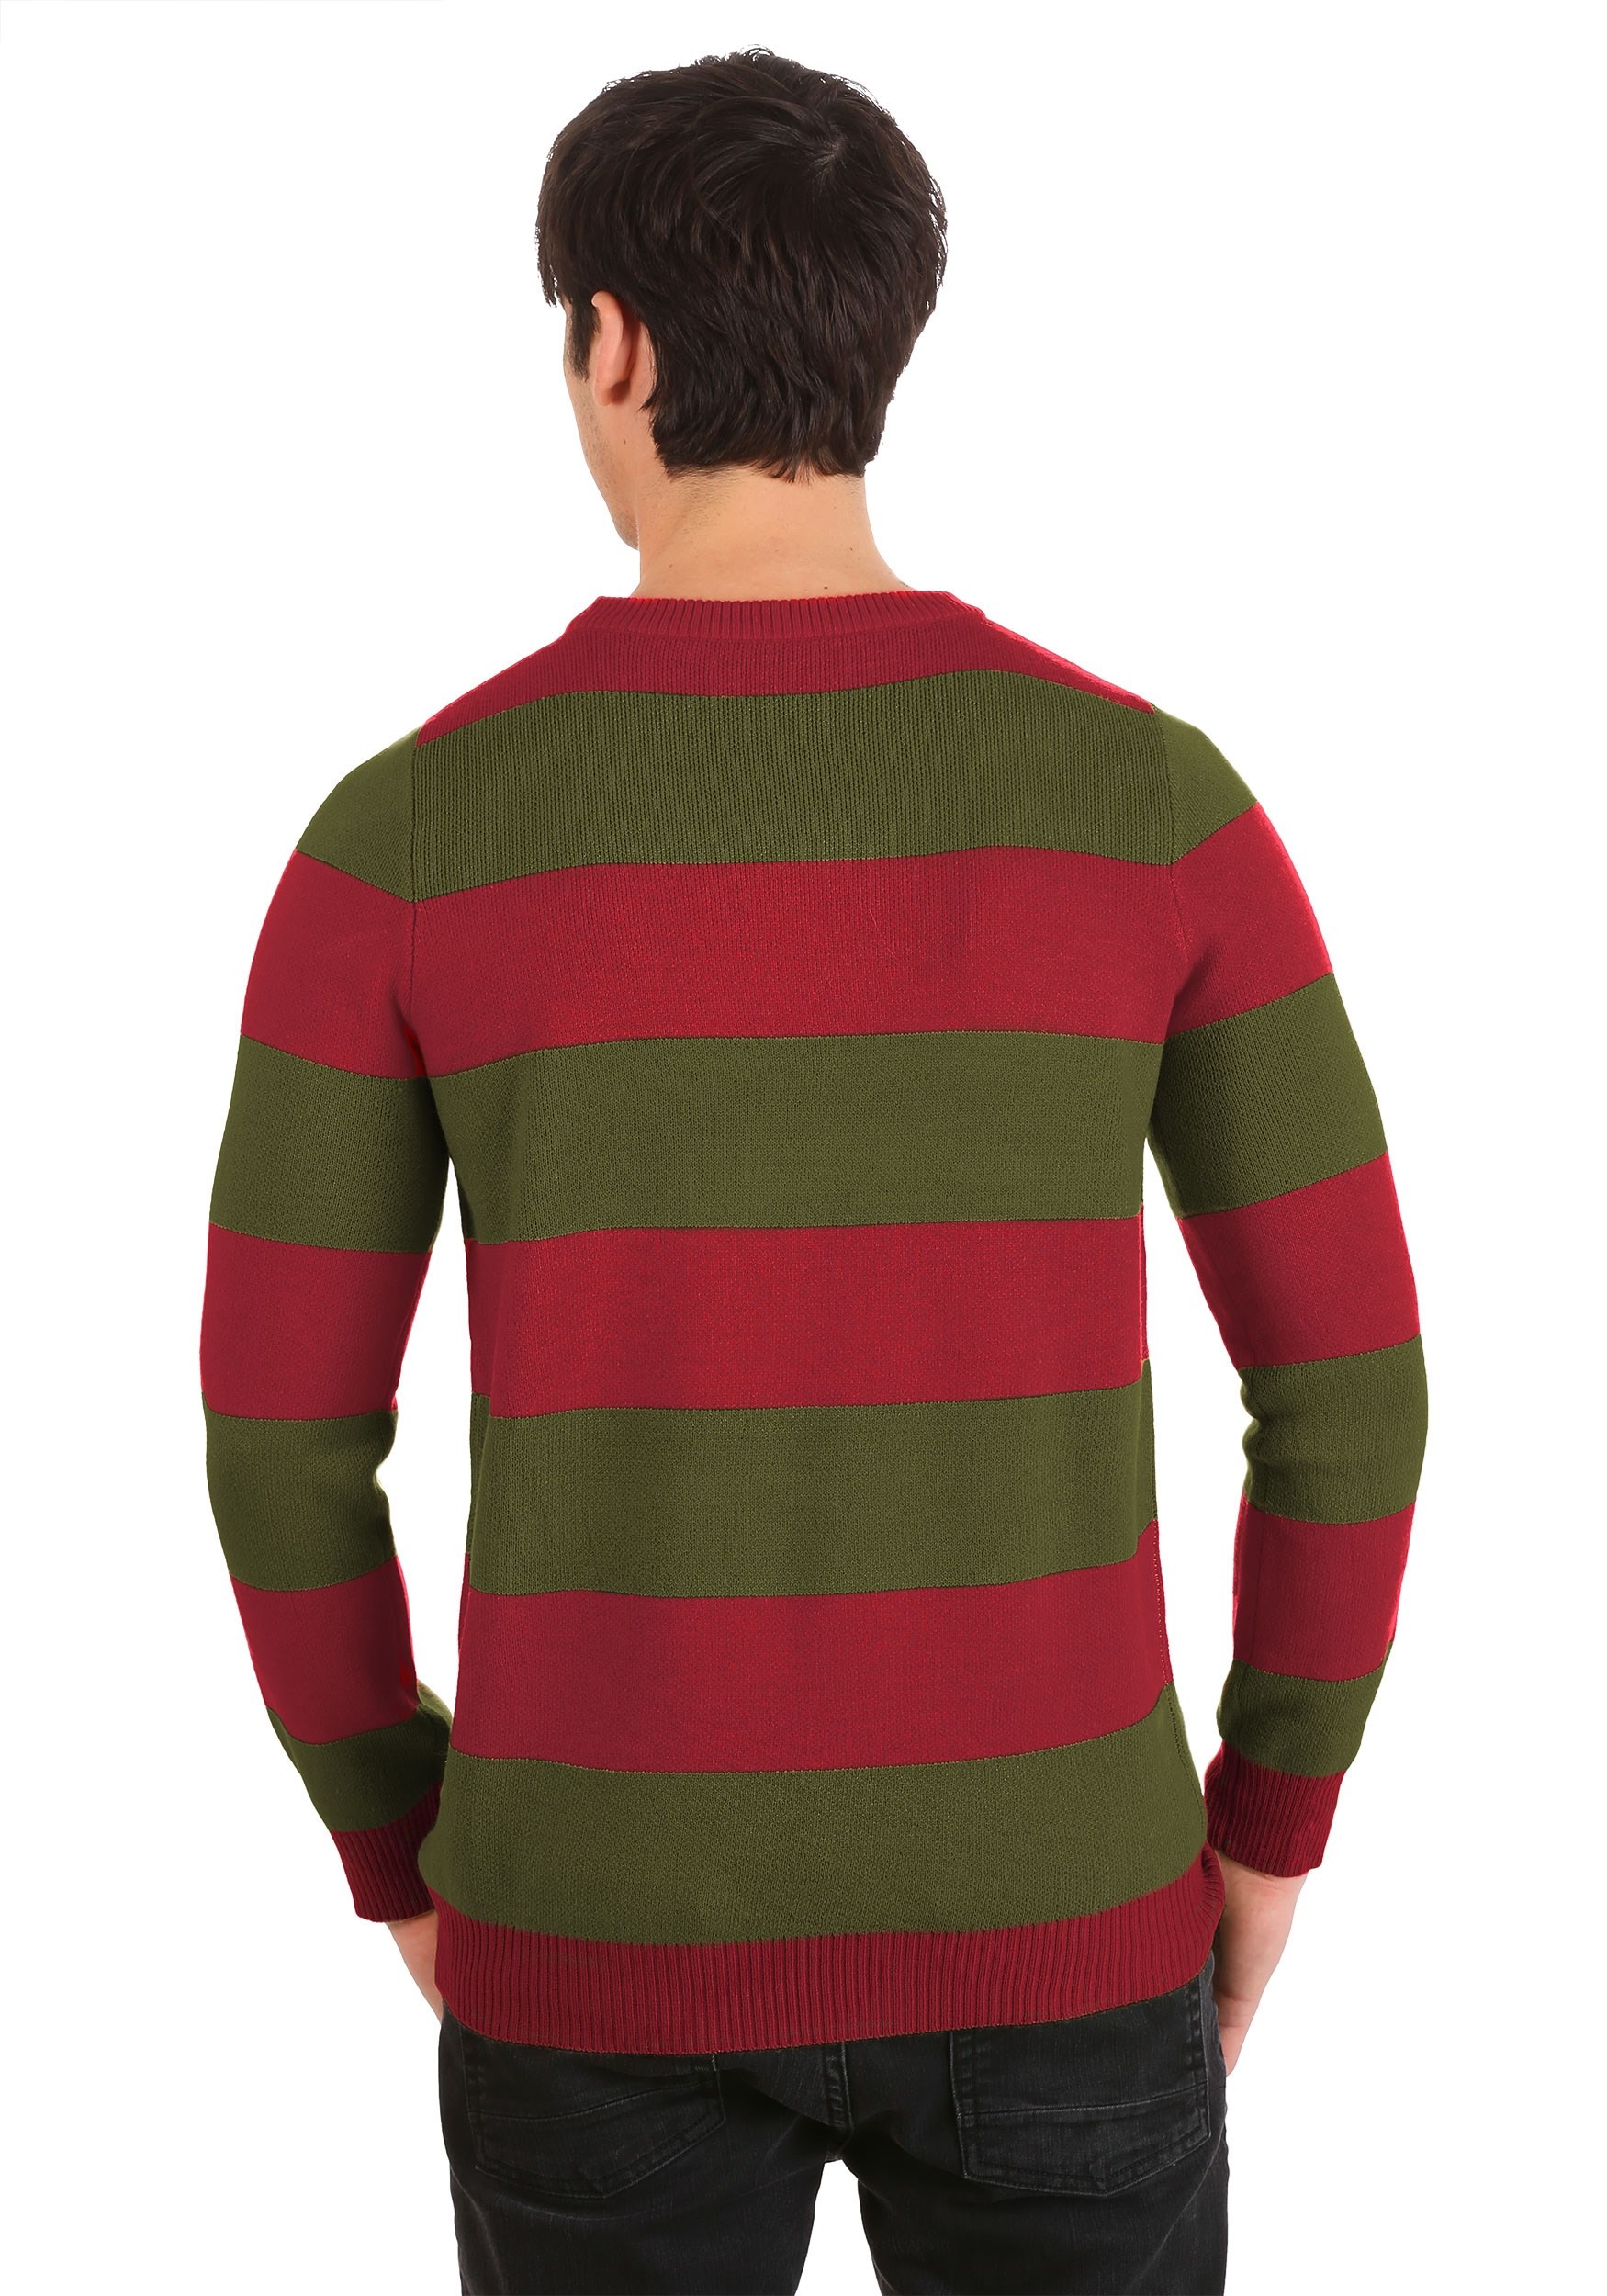 Kids Large 6-10y Fast and Free Shipping Nightmare on Elm Street Freddy Krueger Red and Green Striped Sweater Pattern Super Soft Leggings Unisex Adult Kids Boys Girls Women 